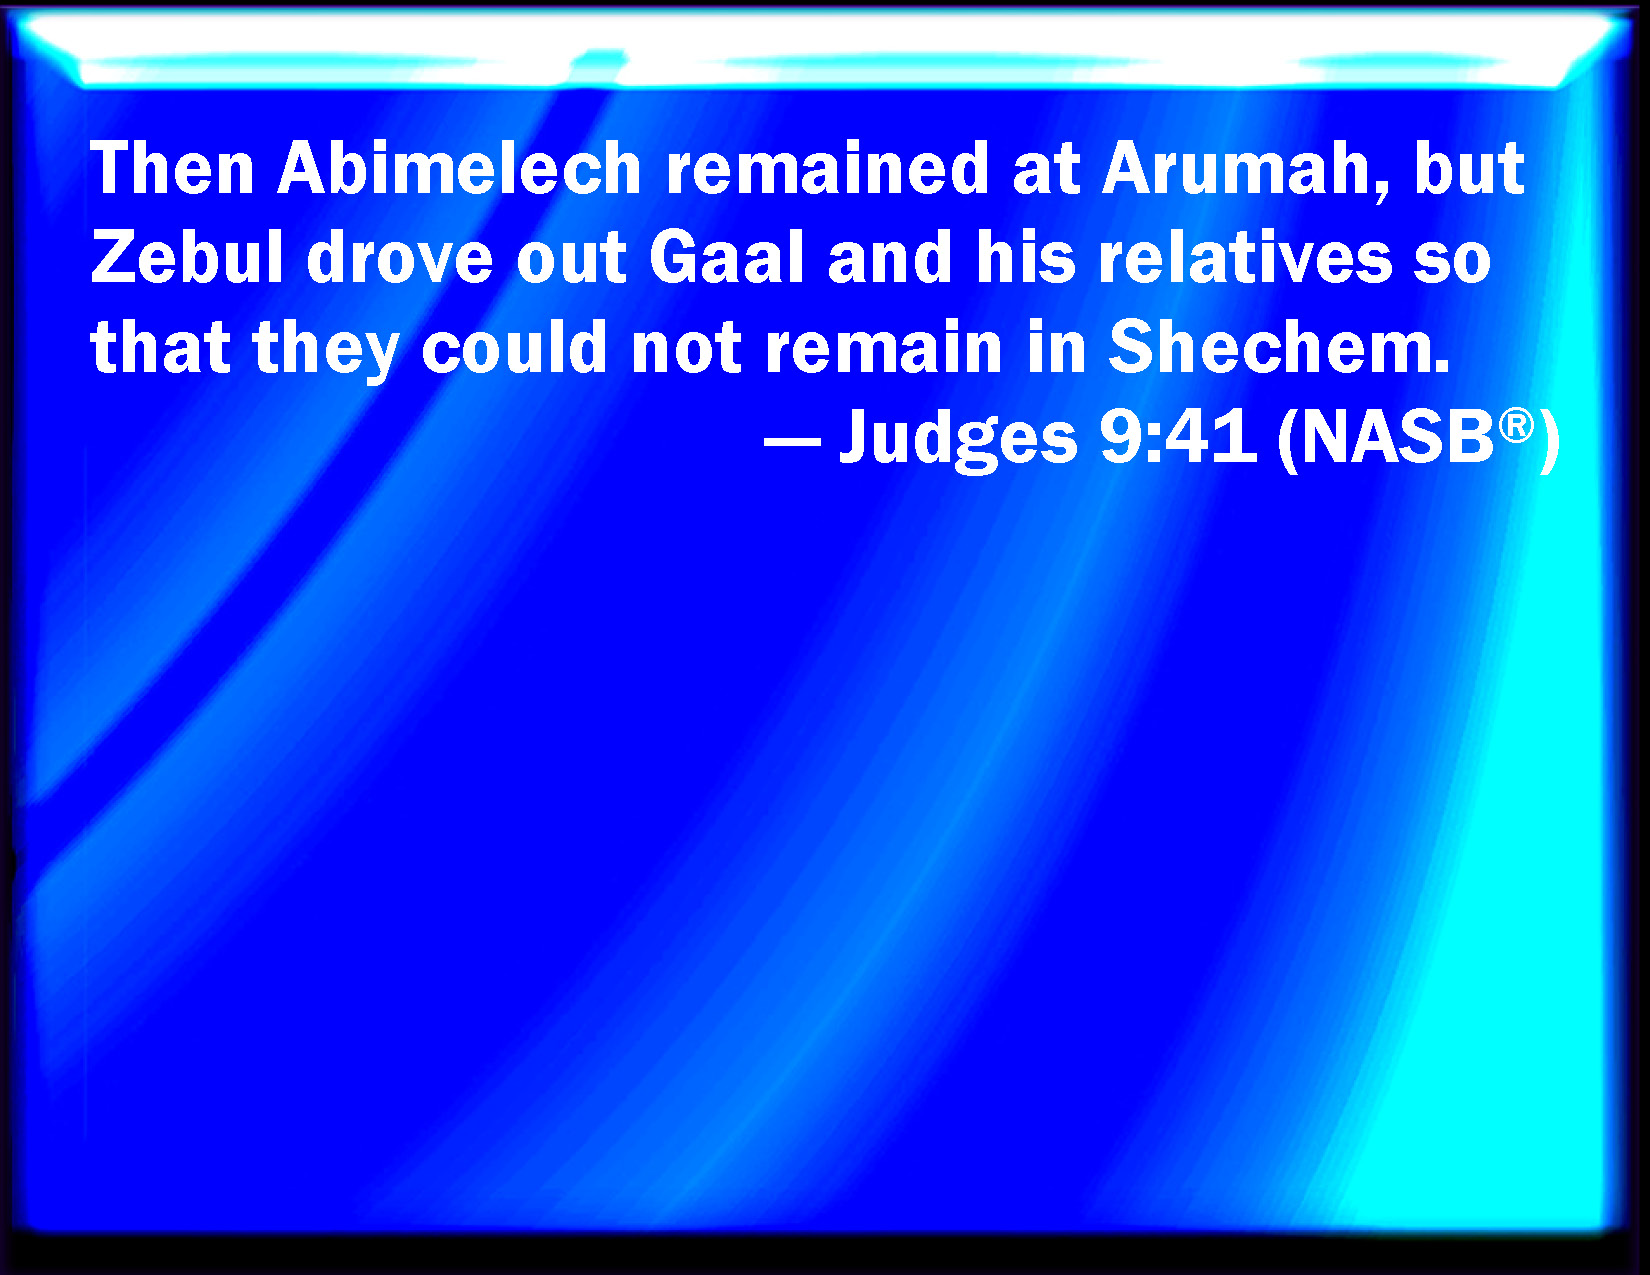 Judges 9:41 And Abimelech dwelled at Arumah: and Zebul thrust out Gaal